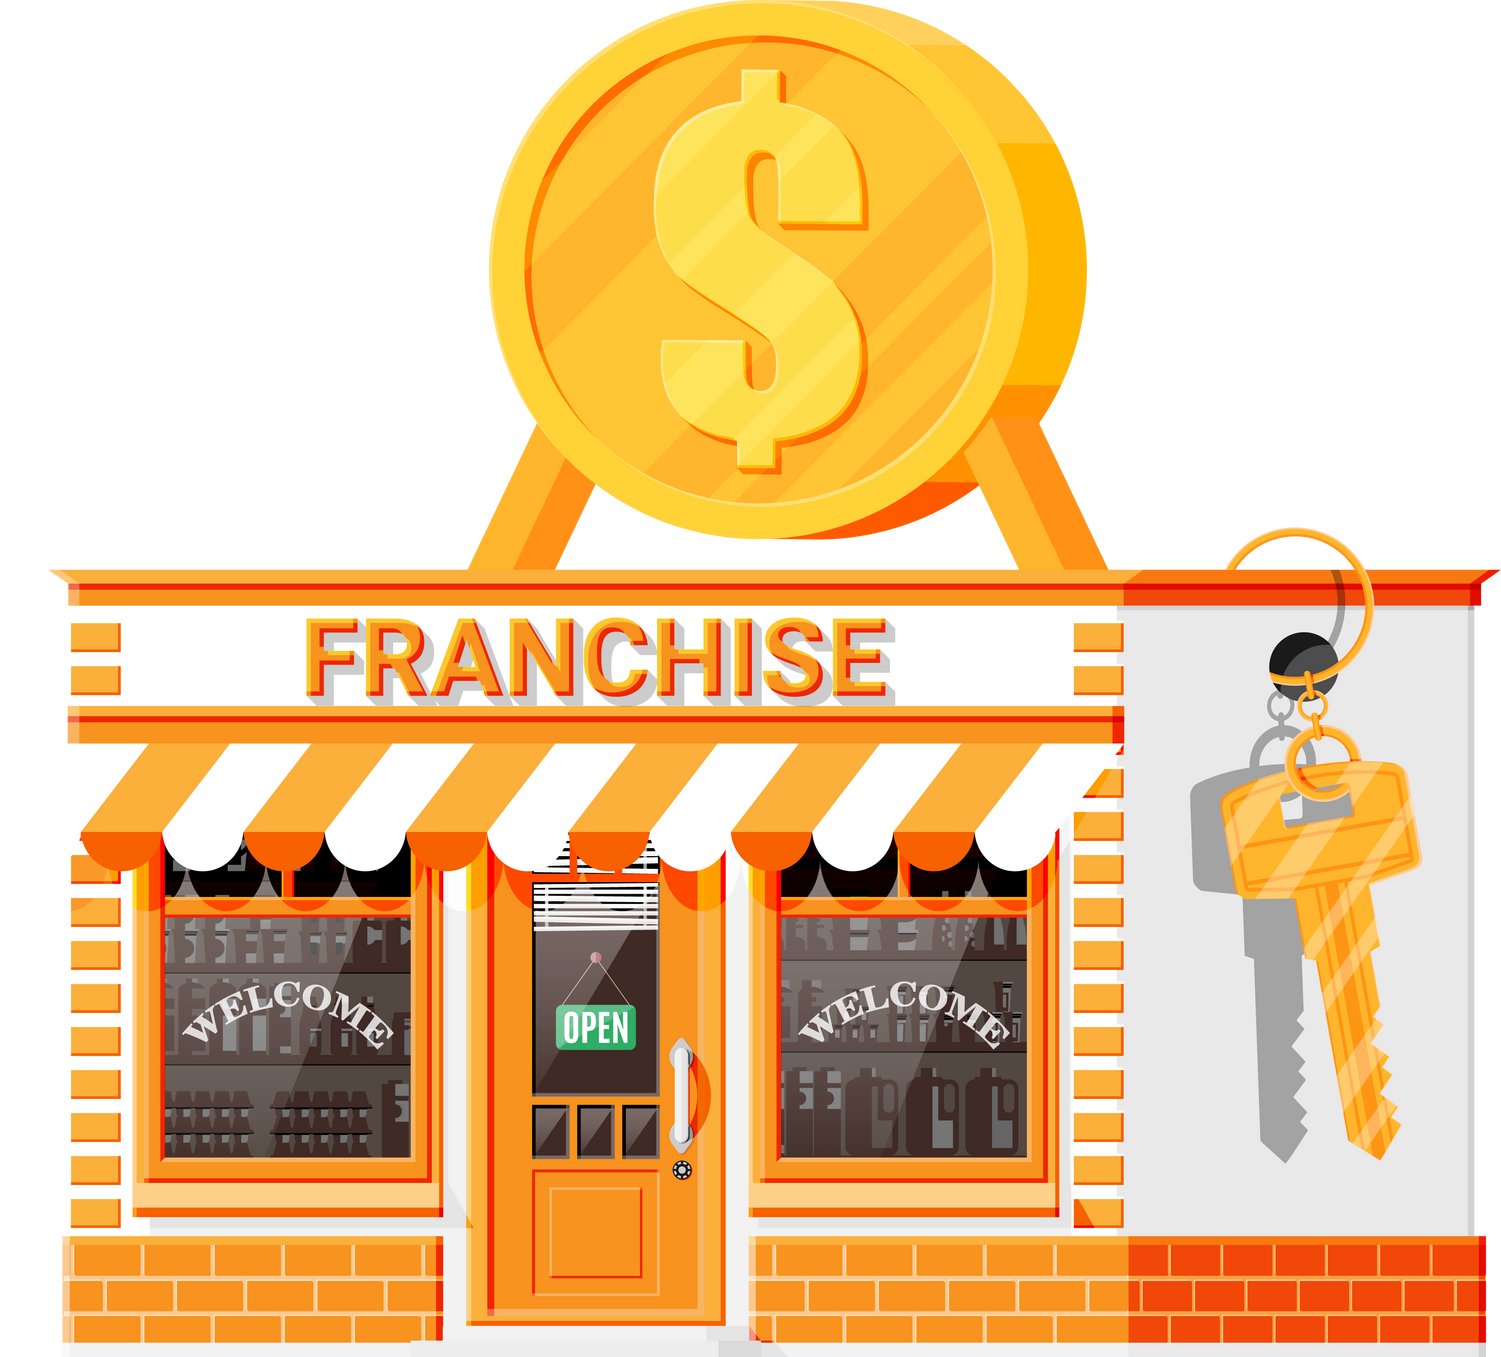 Franchise business for sale.